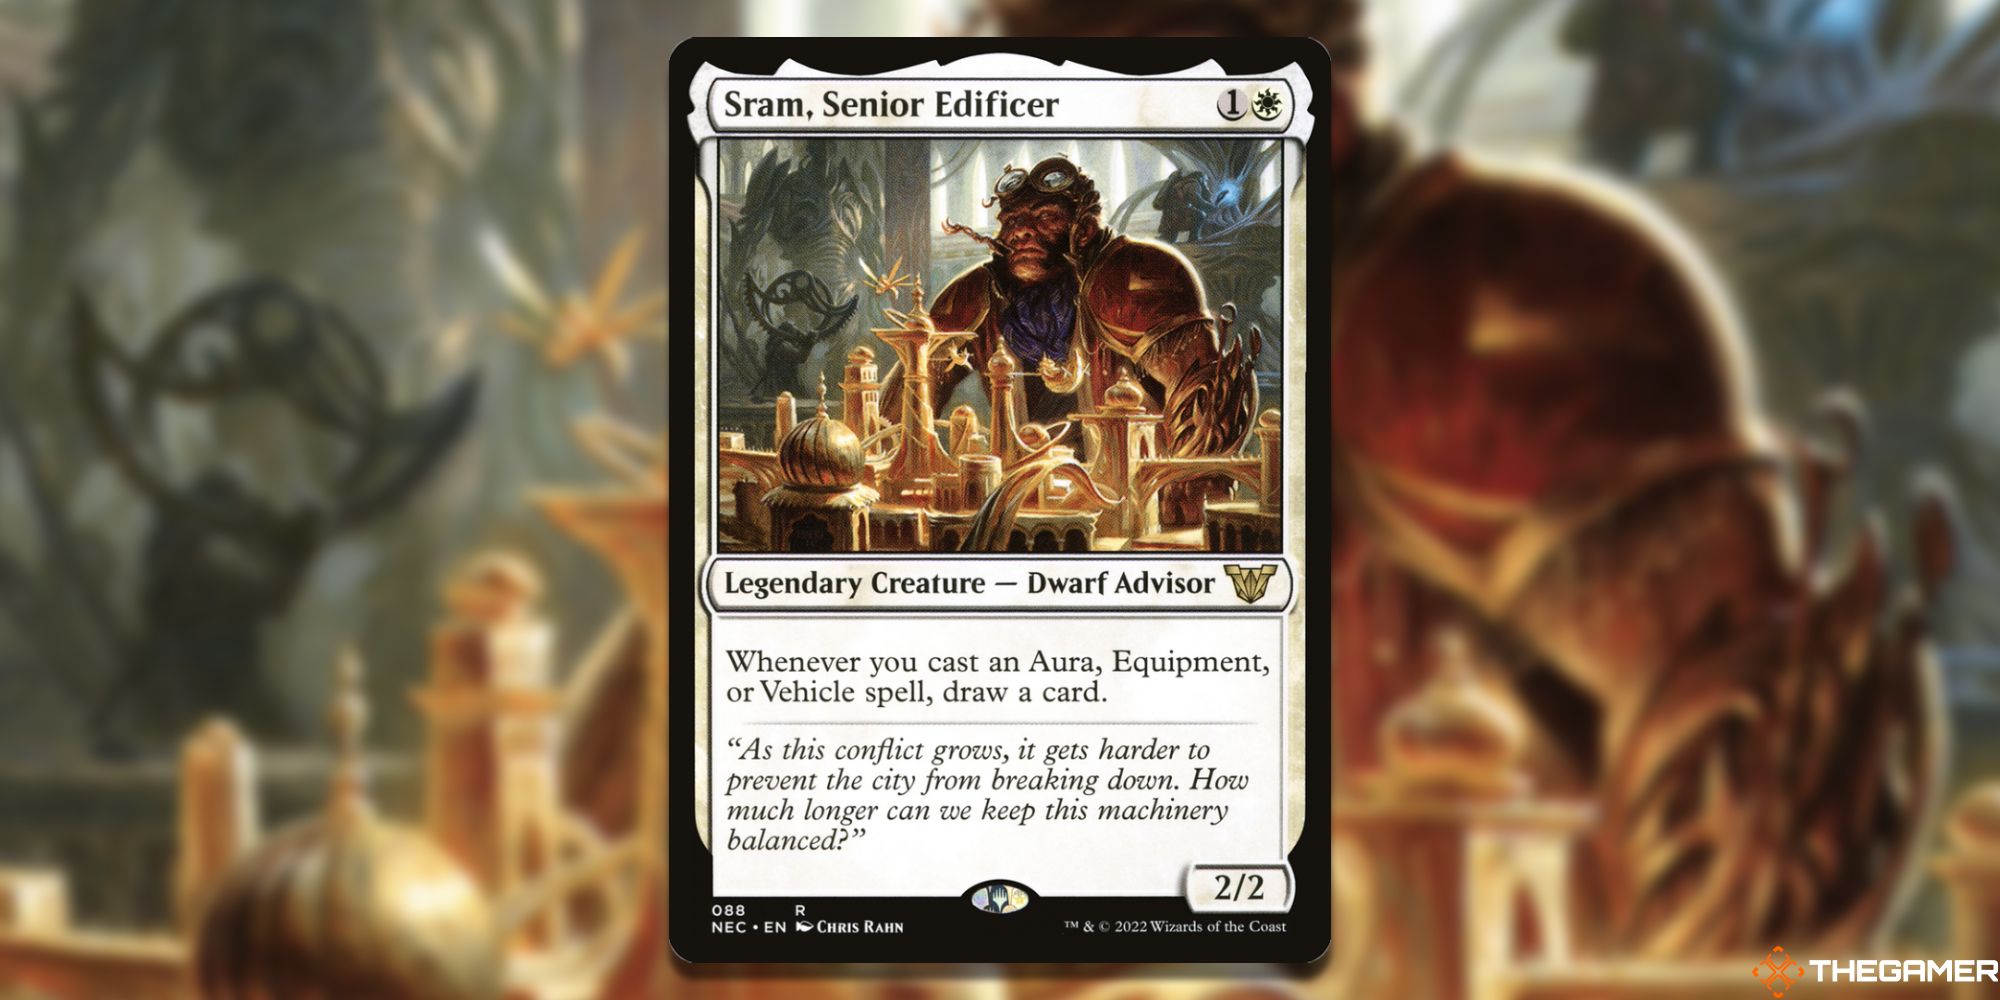 Image of the Sram Senior Edificer card in Magic: The Gathering, with art by Chris Rahn